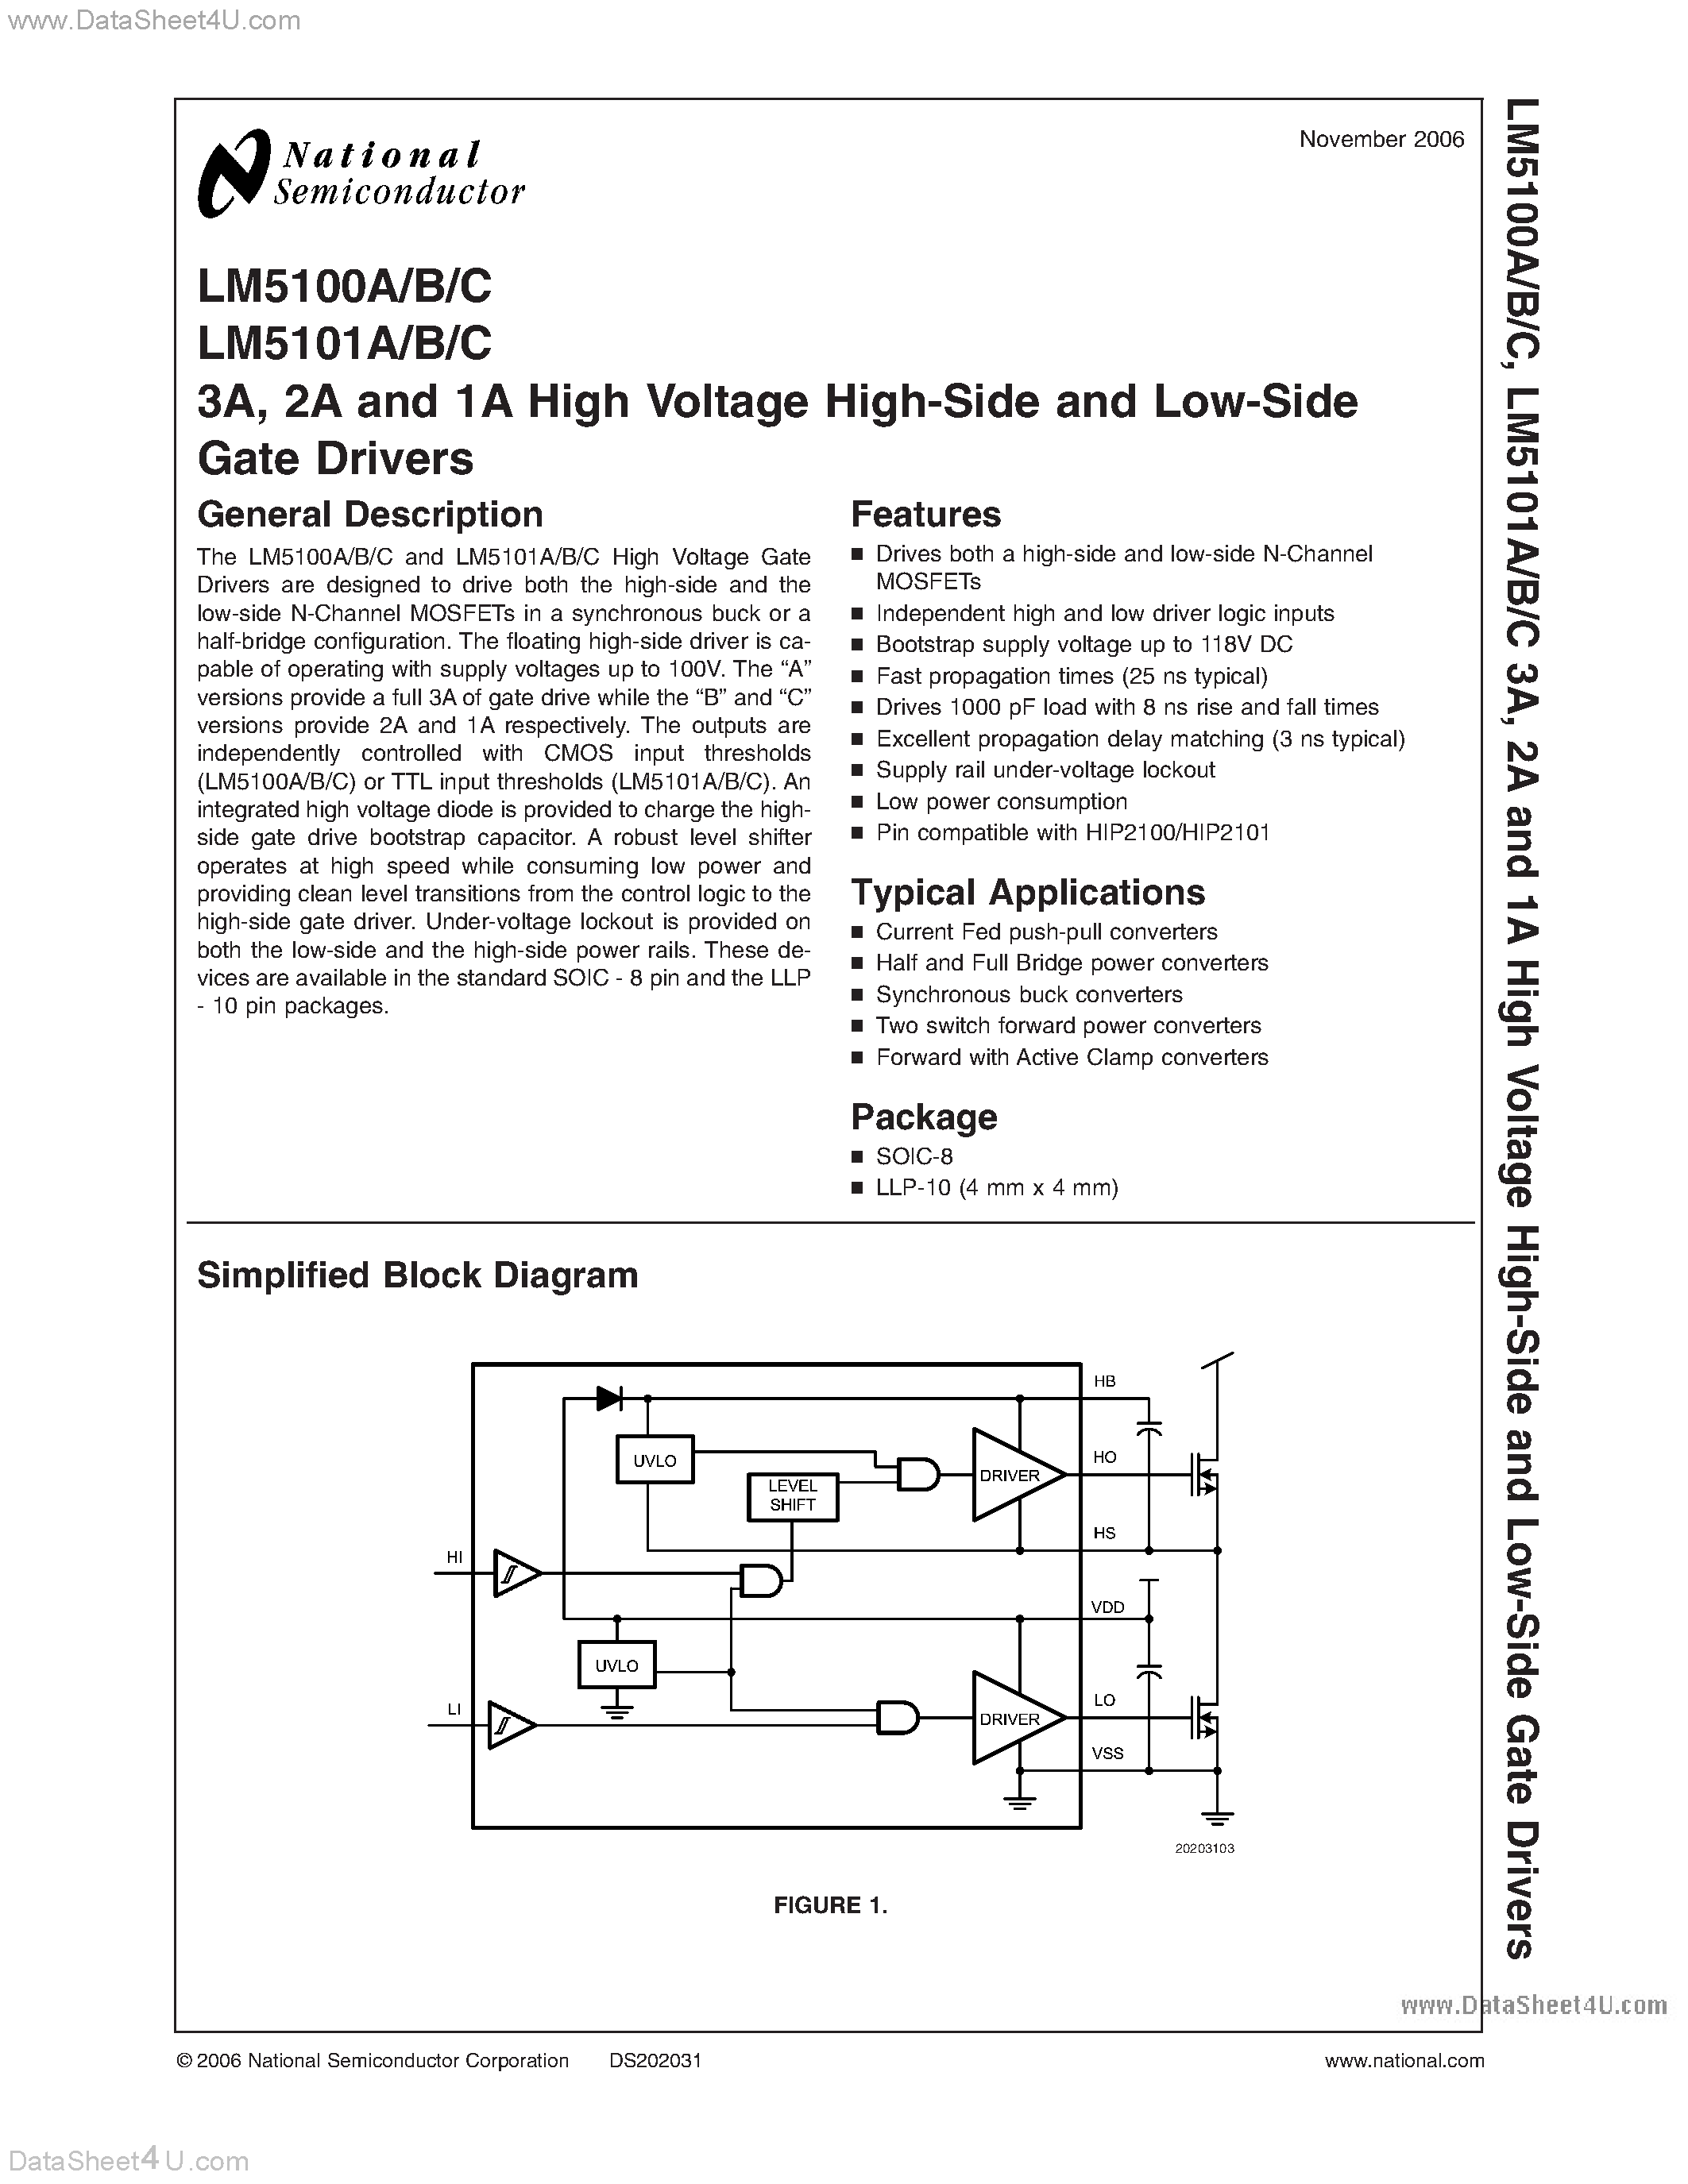 Даташит LM5100A - (LM5100x / LM5101x) High Voltage High Side and Low Side Gate Drivers страница 1